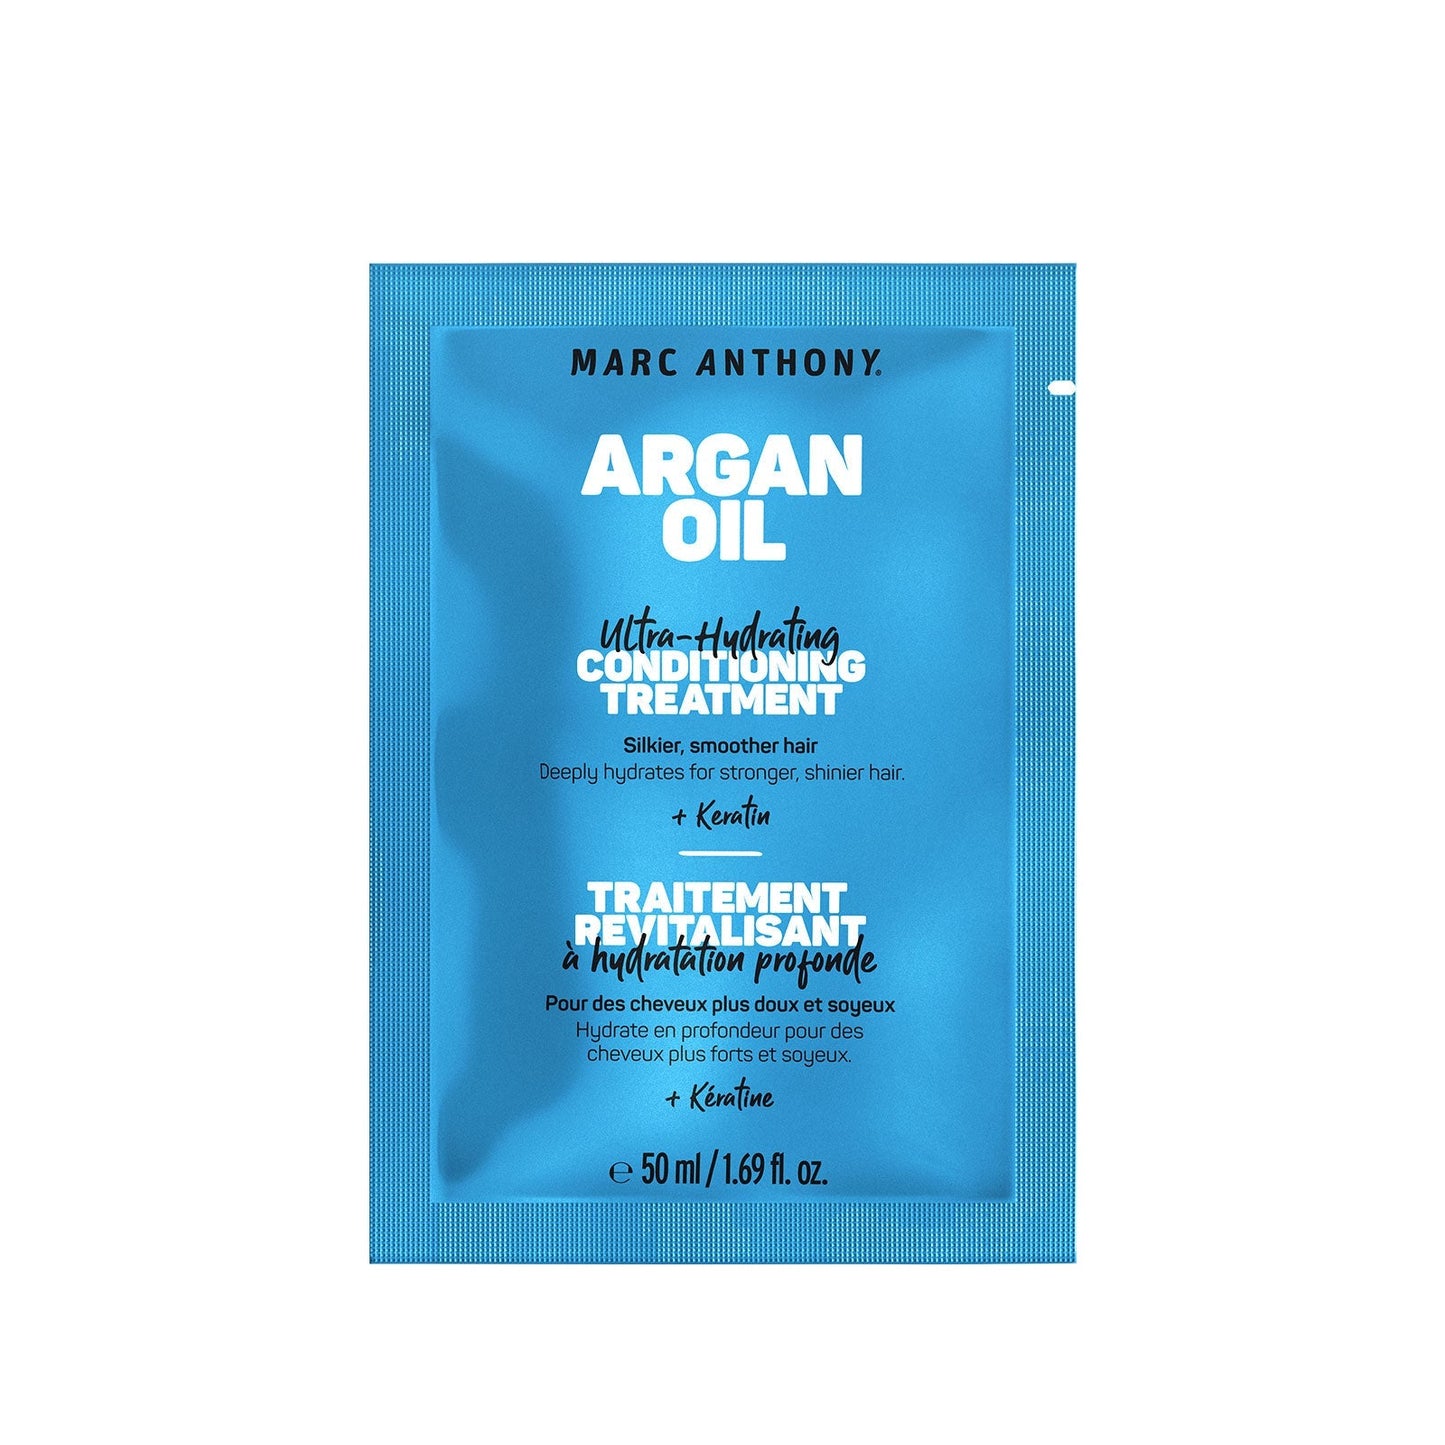 [FREE GIFT 2] Argan Oil of Morocco Conditioning Treatment 50ml